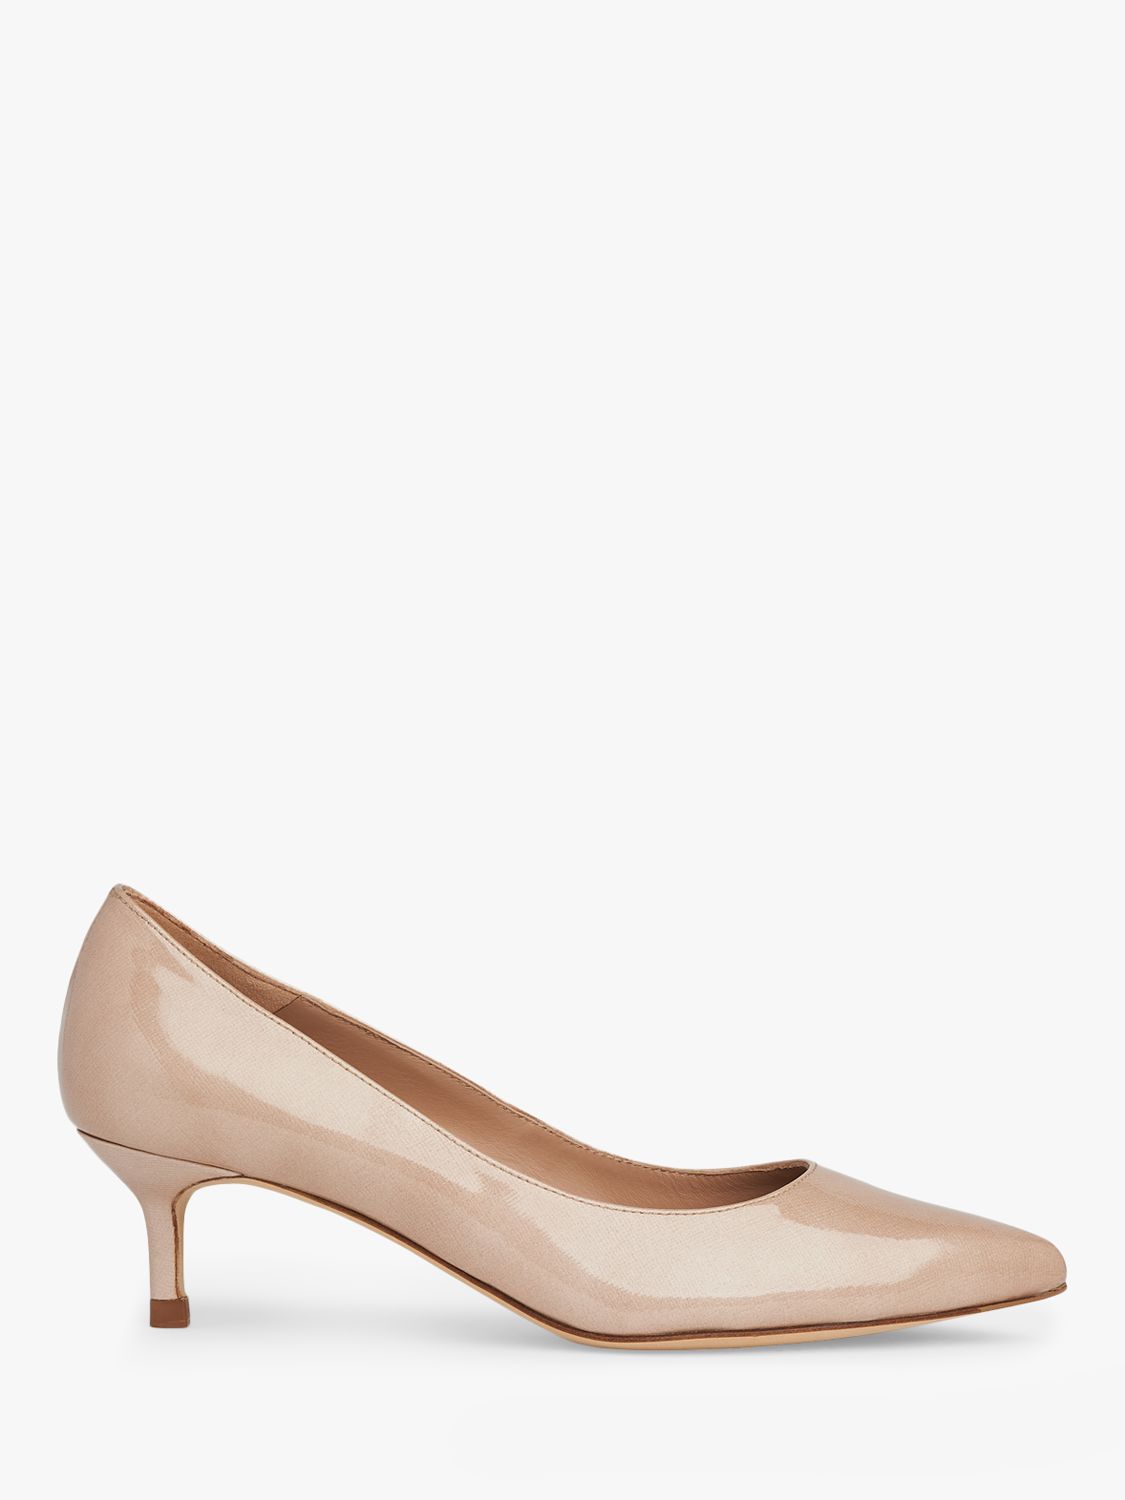 L.K.Bennett Audrey Crinkle Patent Pointed Toe Court Shoes, Nude ...